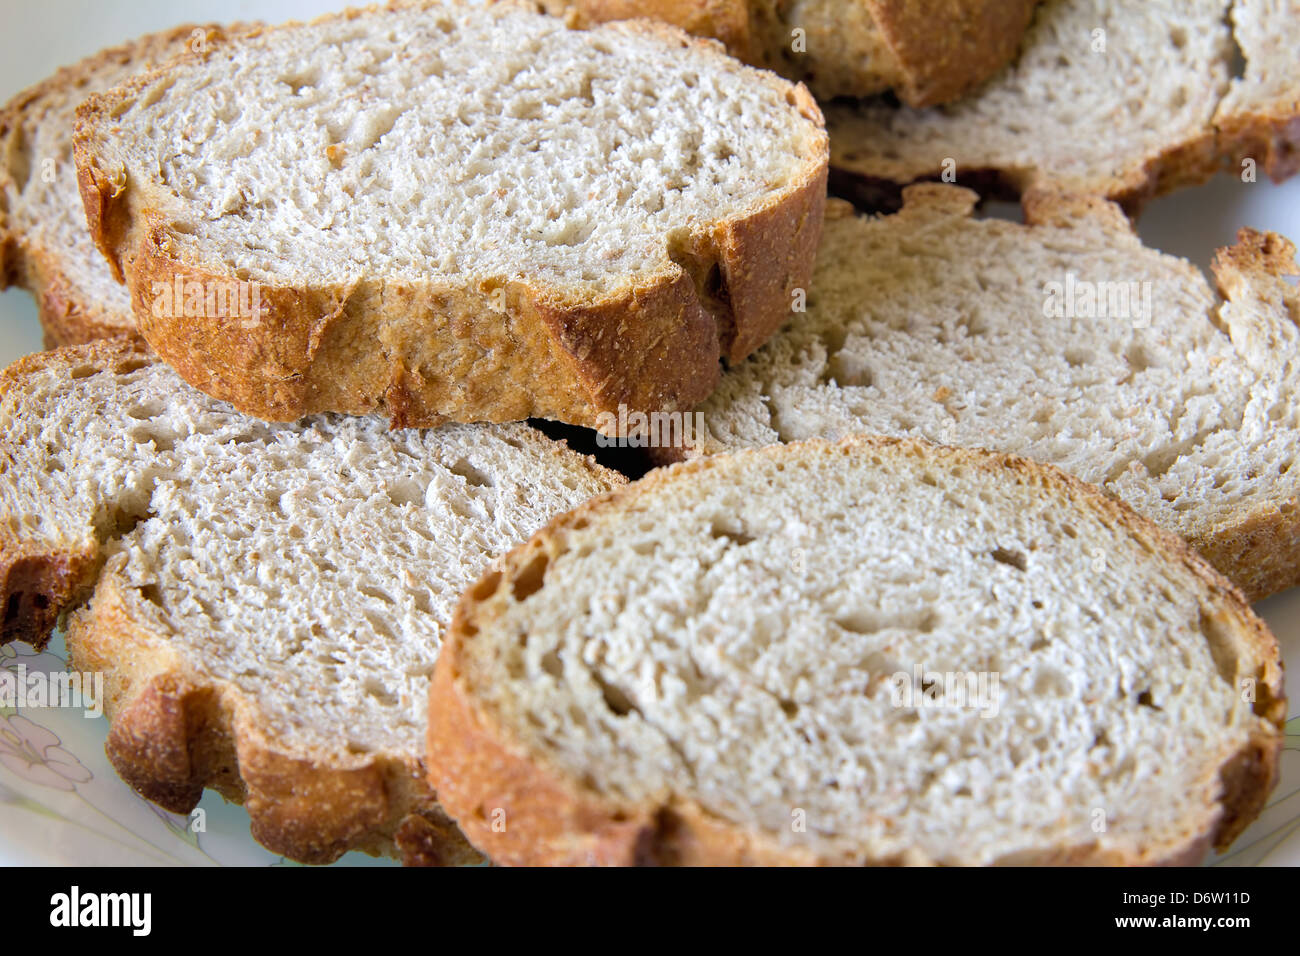 Sliced Sour Dough Whole Wheat French Bread on a Plate Closeup Stock Photo